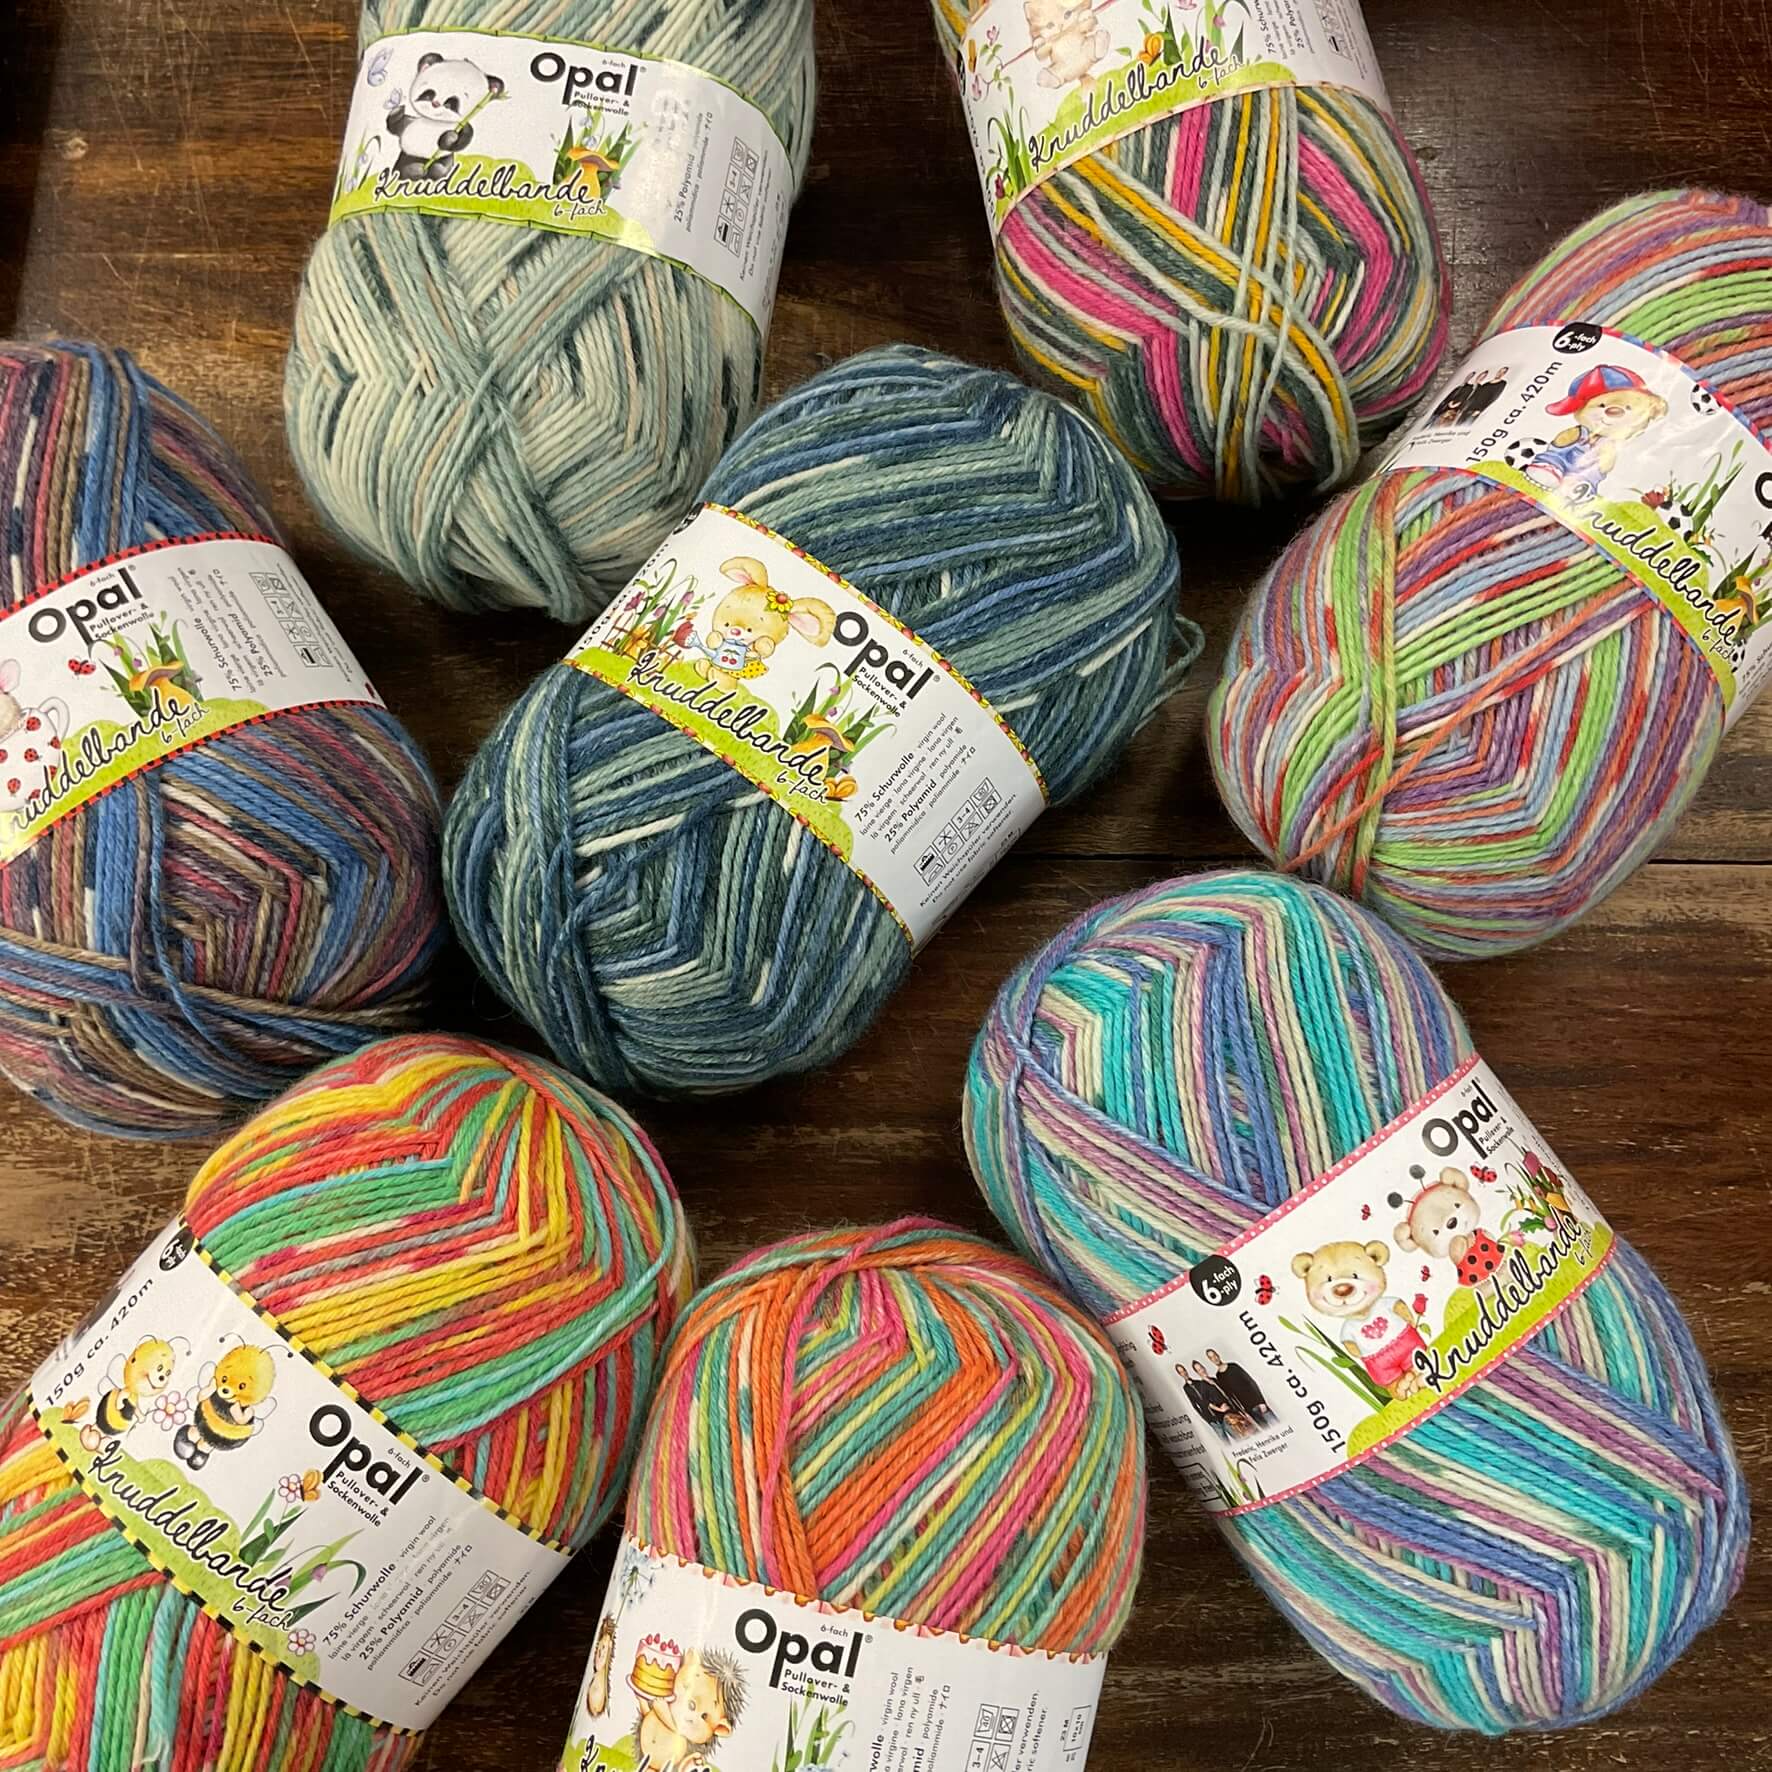 8 balls of multicoloured opal 6ply sock wool yarn on a wooden table at The Woolly Brew yarn shop